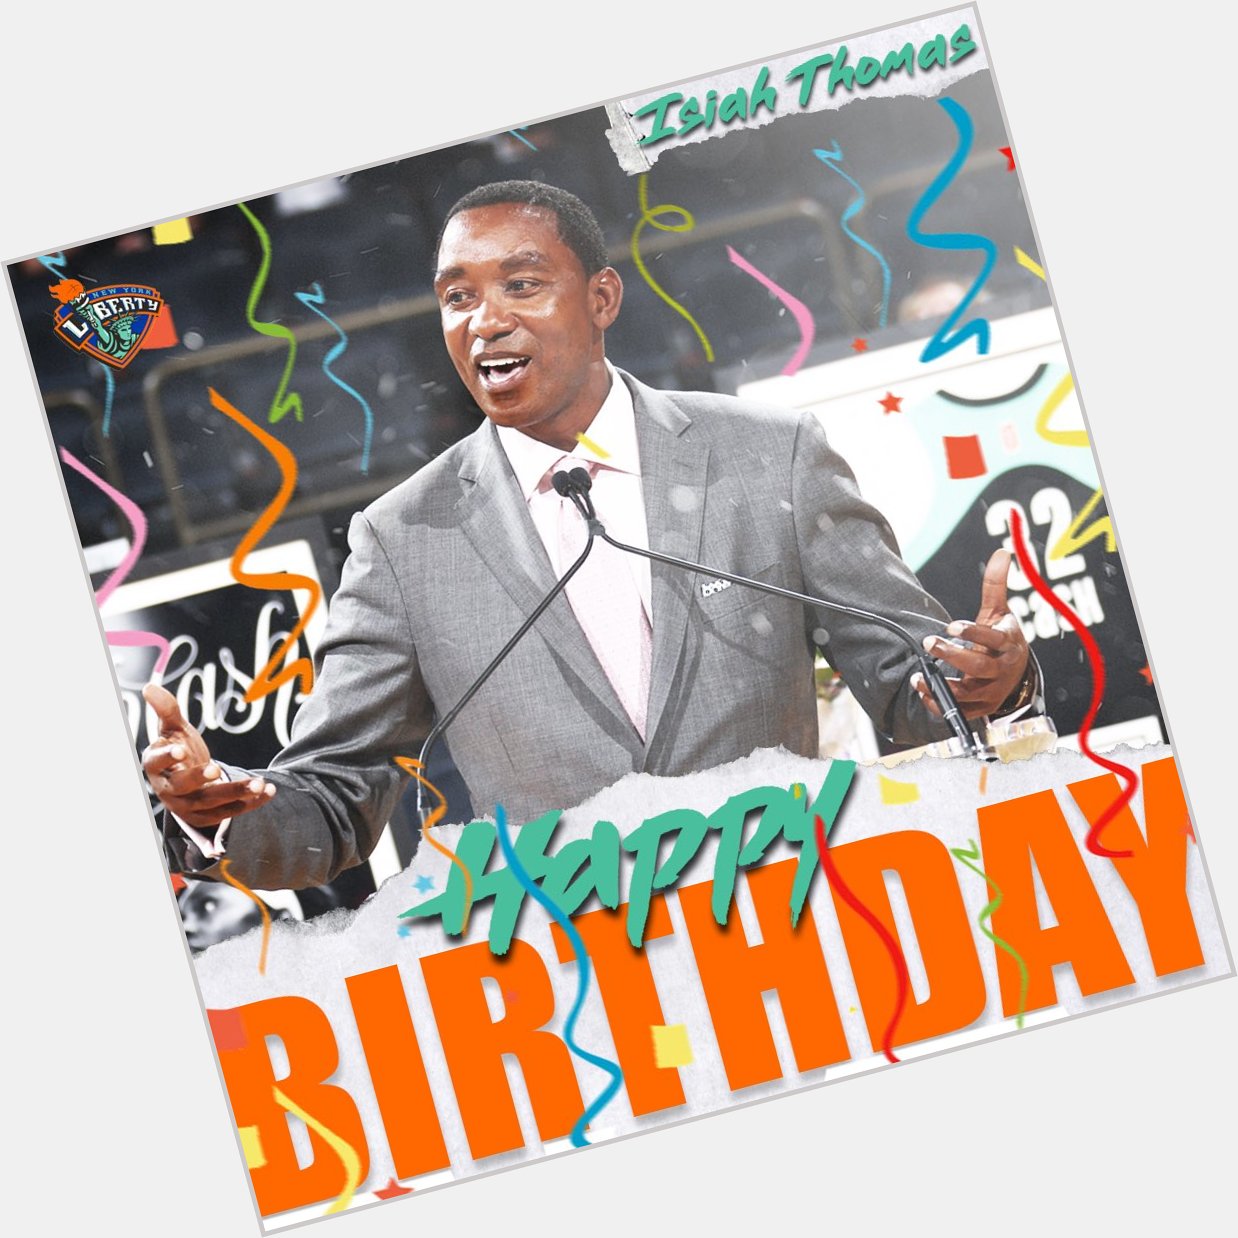 Join us in wishing our Team President Isiah Thomas a Happy Birthday  